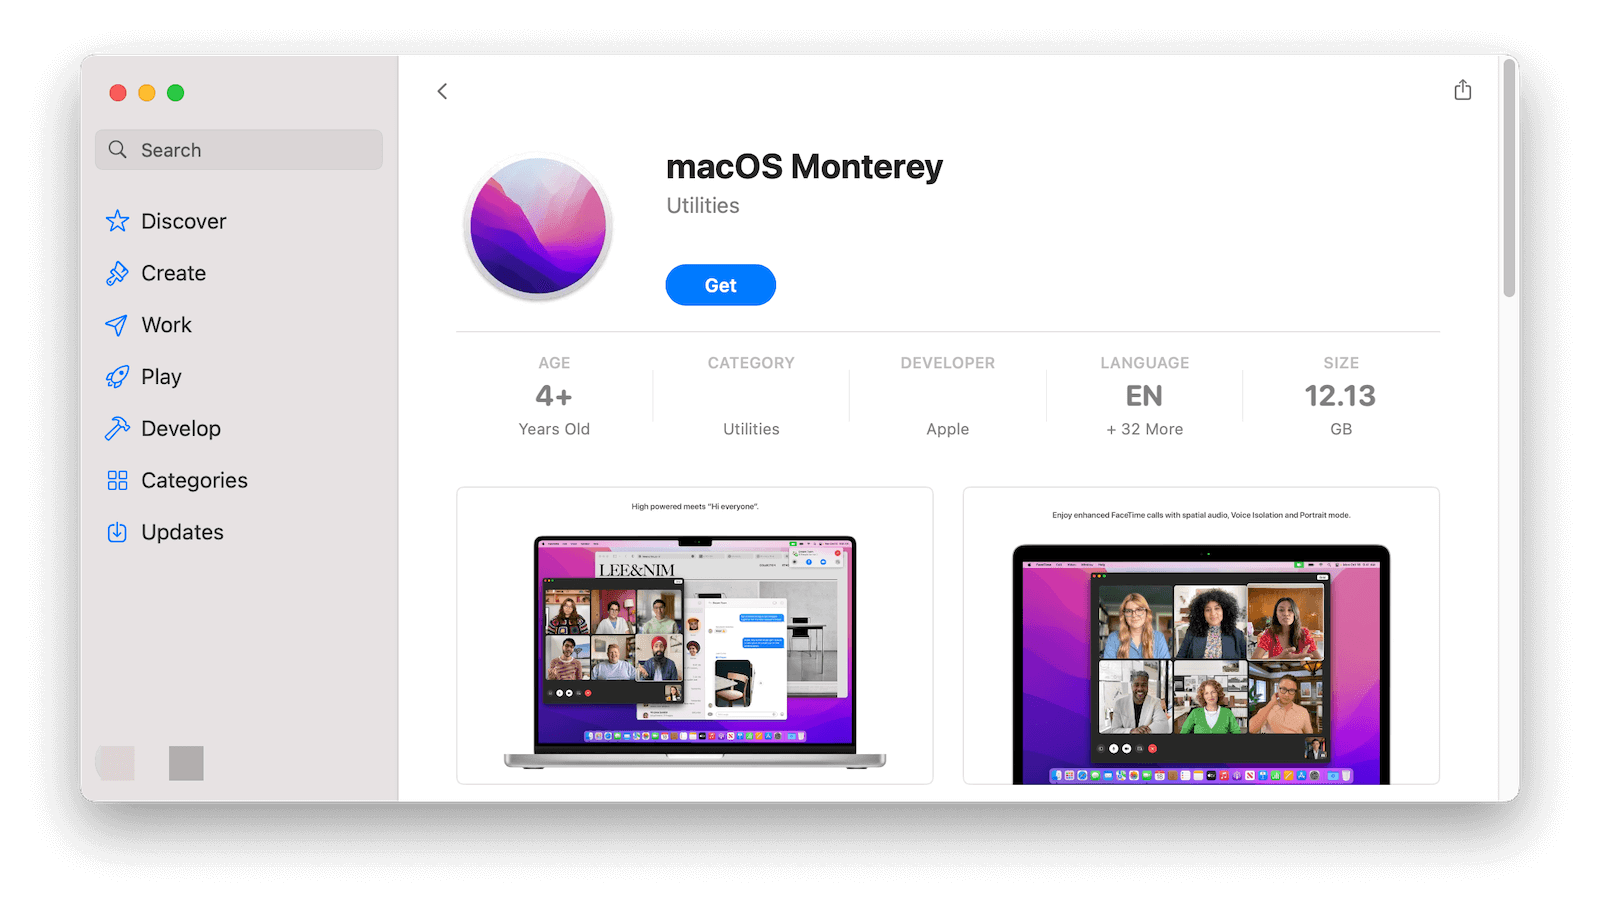 Find macOS Monterey in the App Store